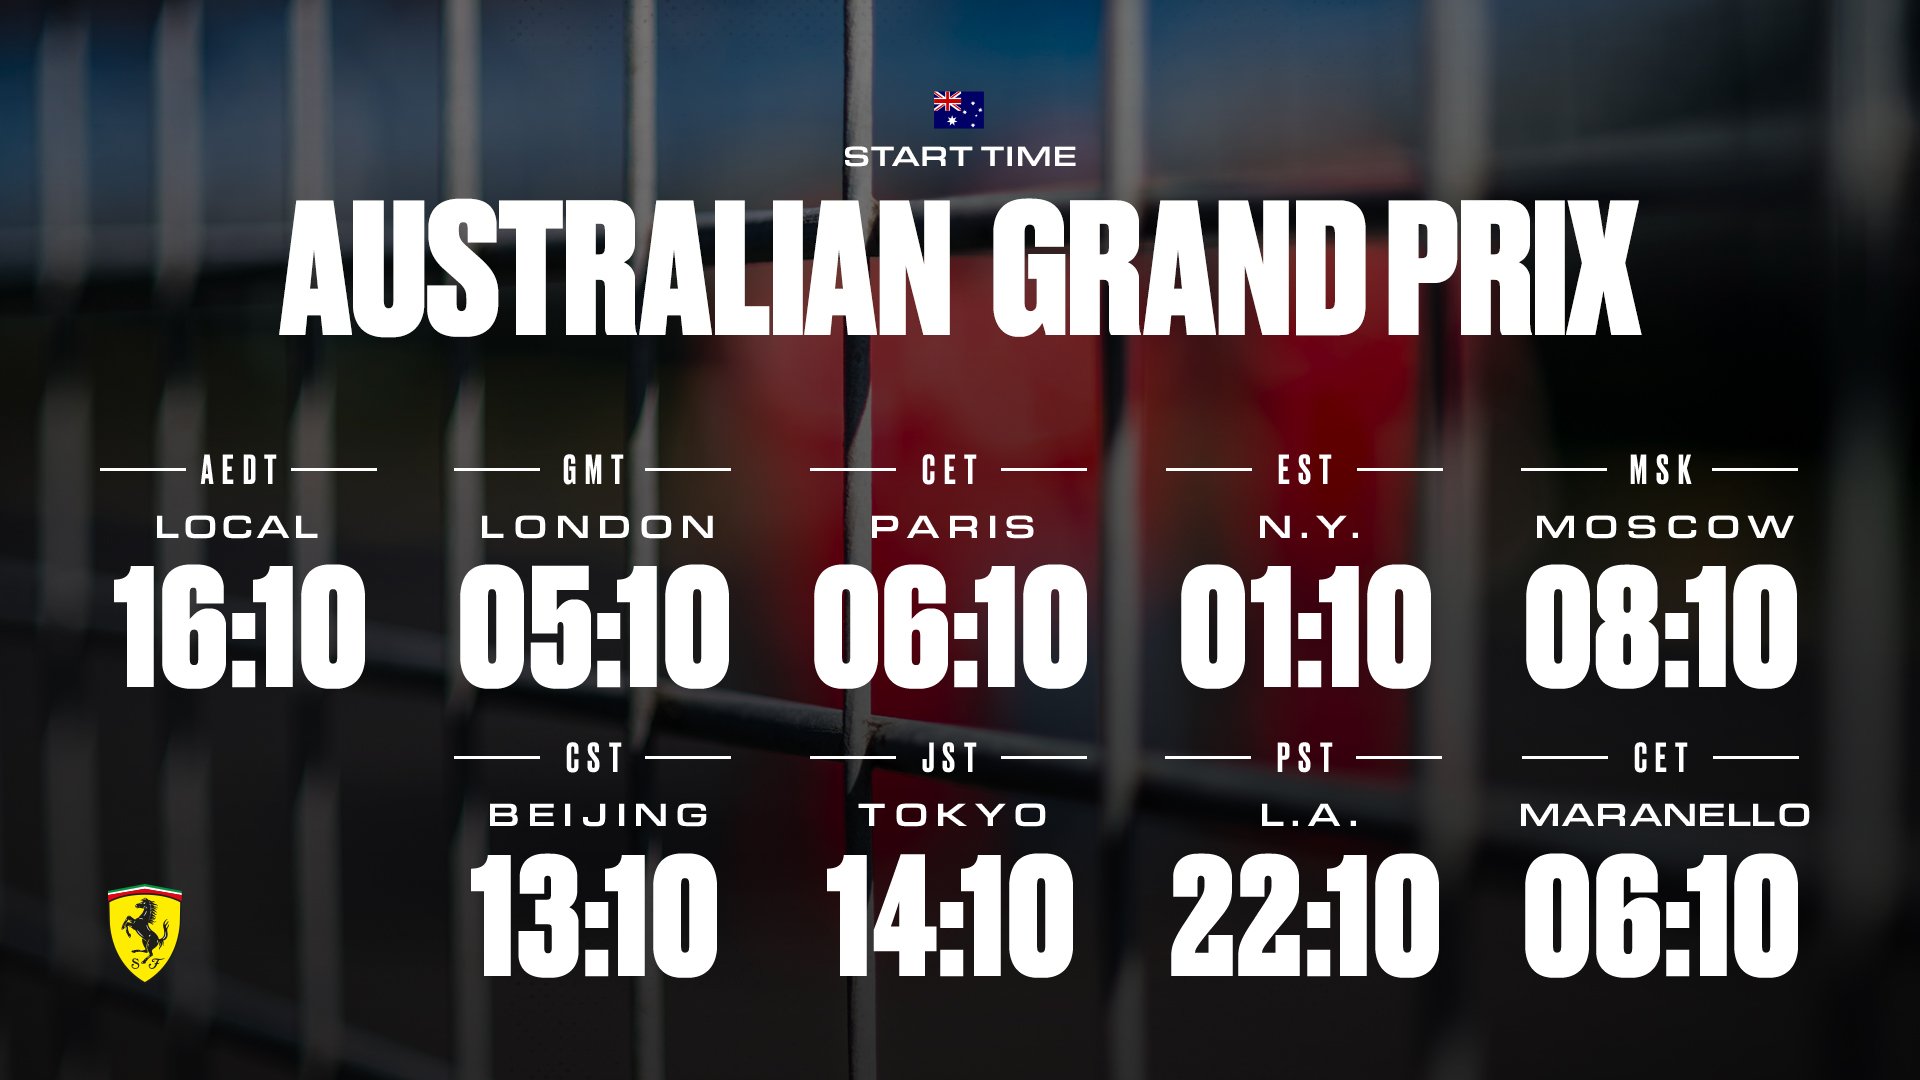 Gud smeltet Ko Scuderia Ferrari on Twitter: "Our clocks are set to #AusGP time! Are yours?  Familiarise yourself with the race times around the world for tomorrow ⏰  #SF90 #essereFerrari https://t.co/N6c23HqLrC" / Twitter